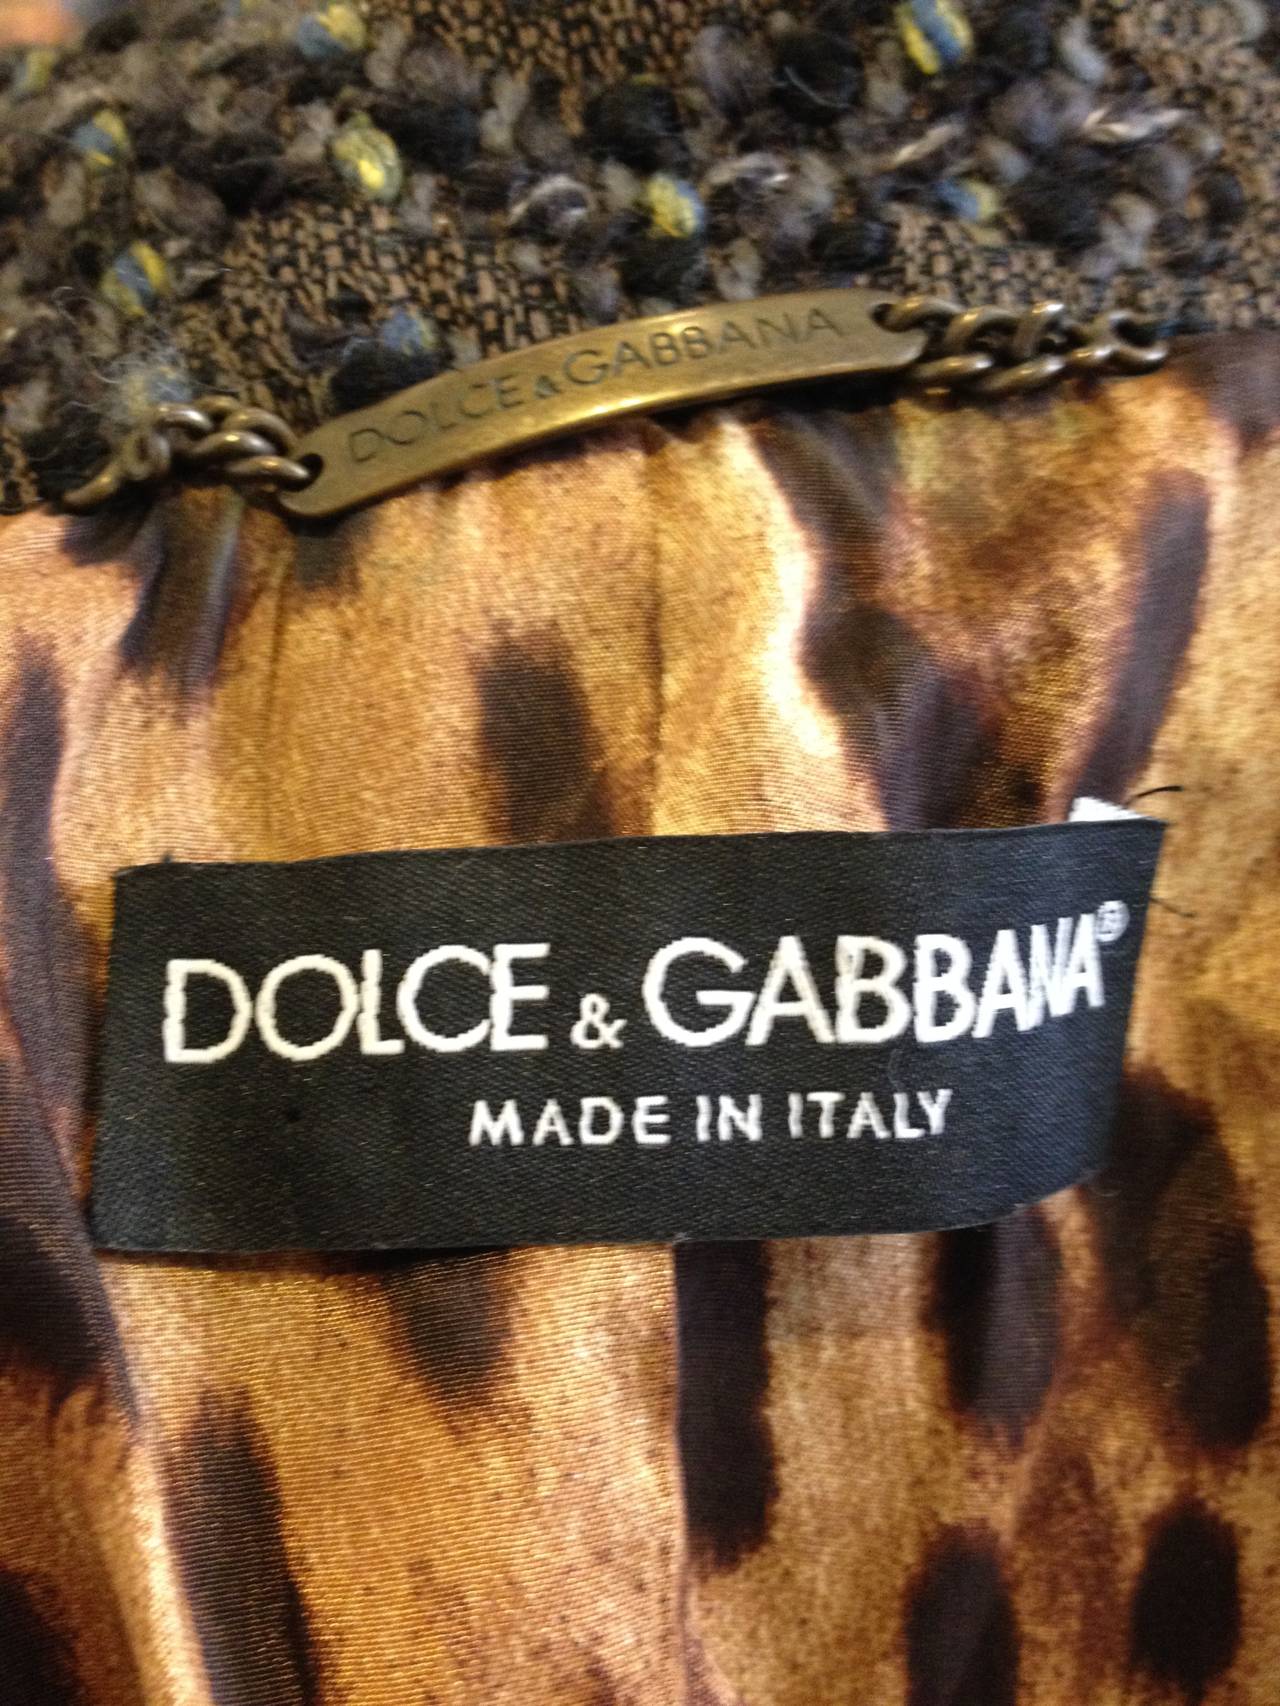 Dolce & Gabbana Olive and Brown Tweed Coat 2